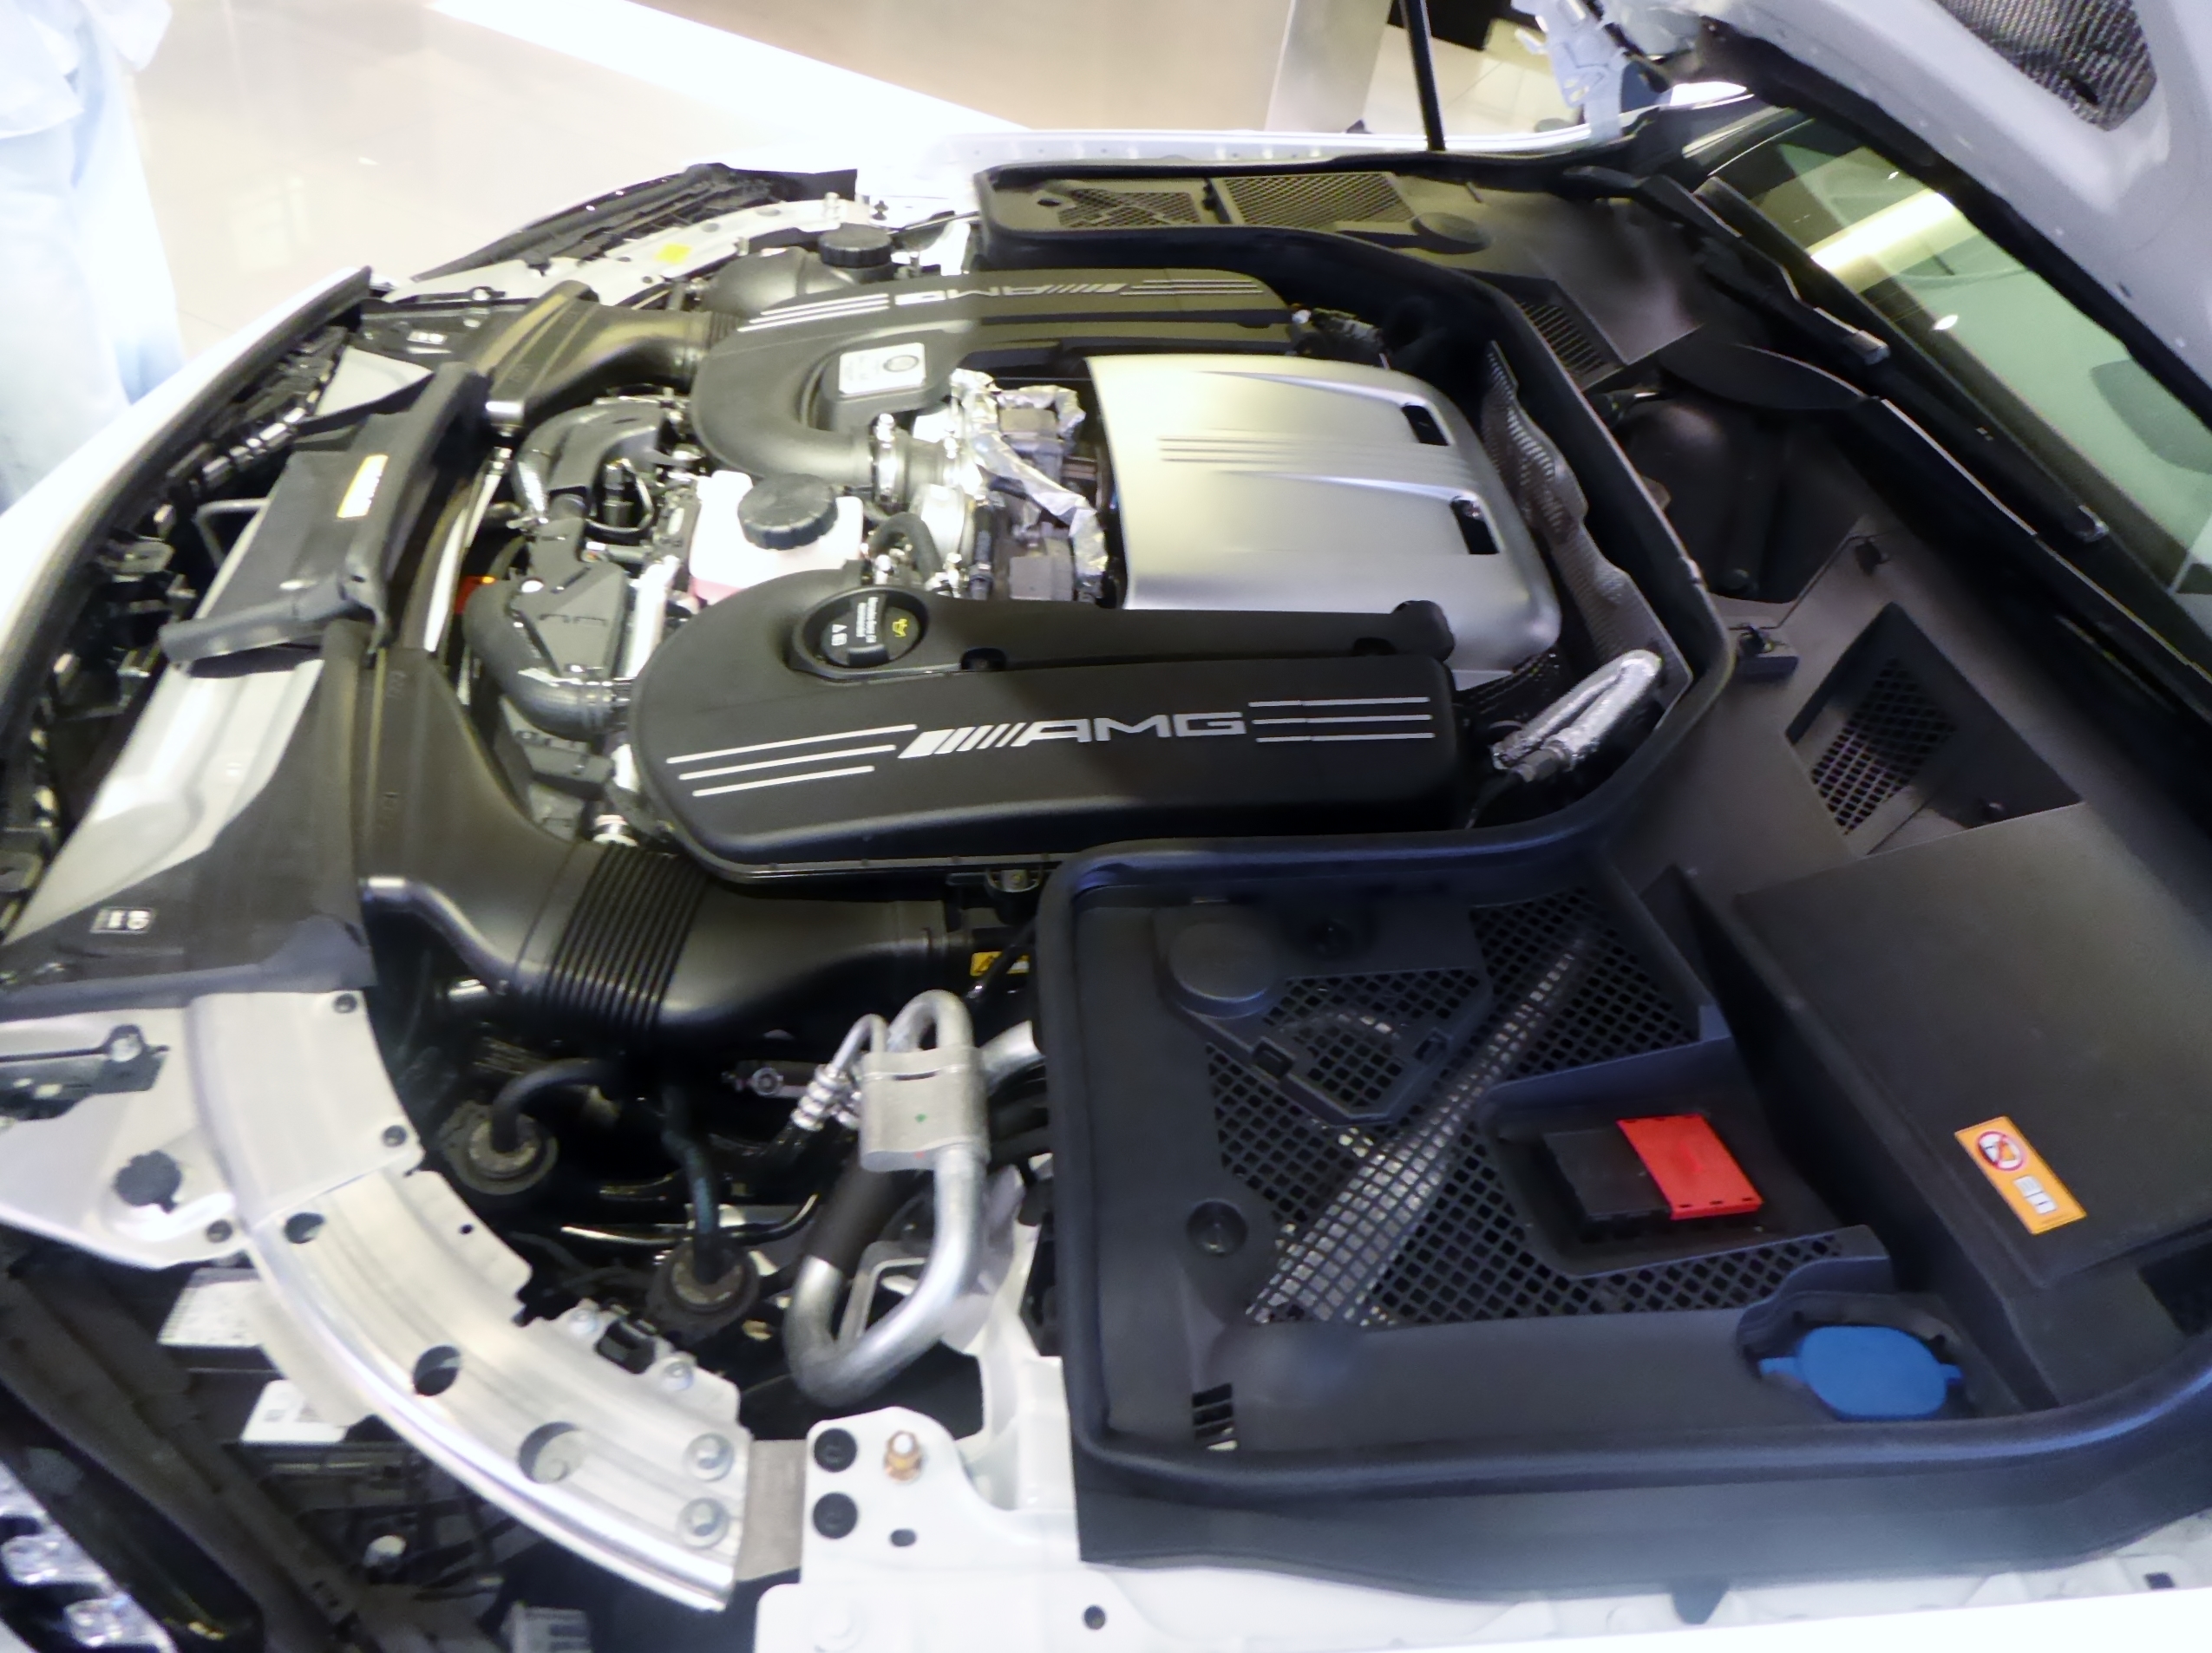 File:The engine room of Mercedes-AMG C63 S (W205).JPG - Wikimedia Commons